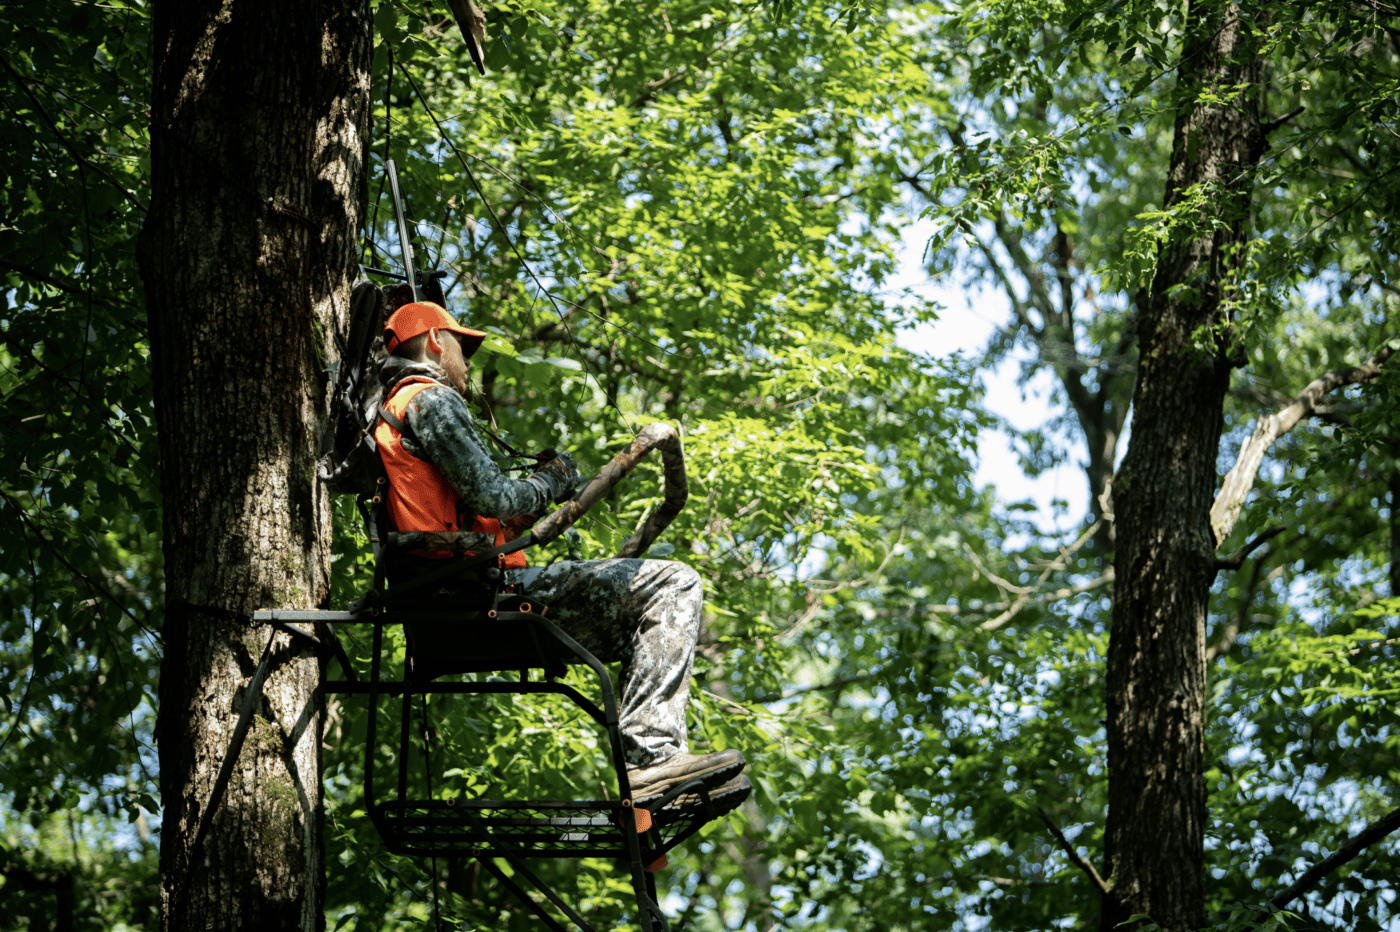 hunter in tree stand